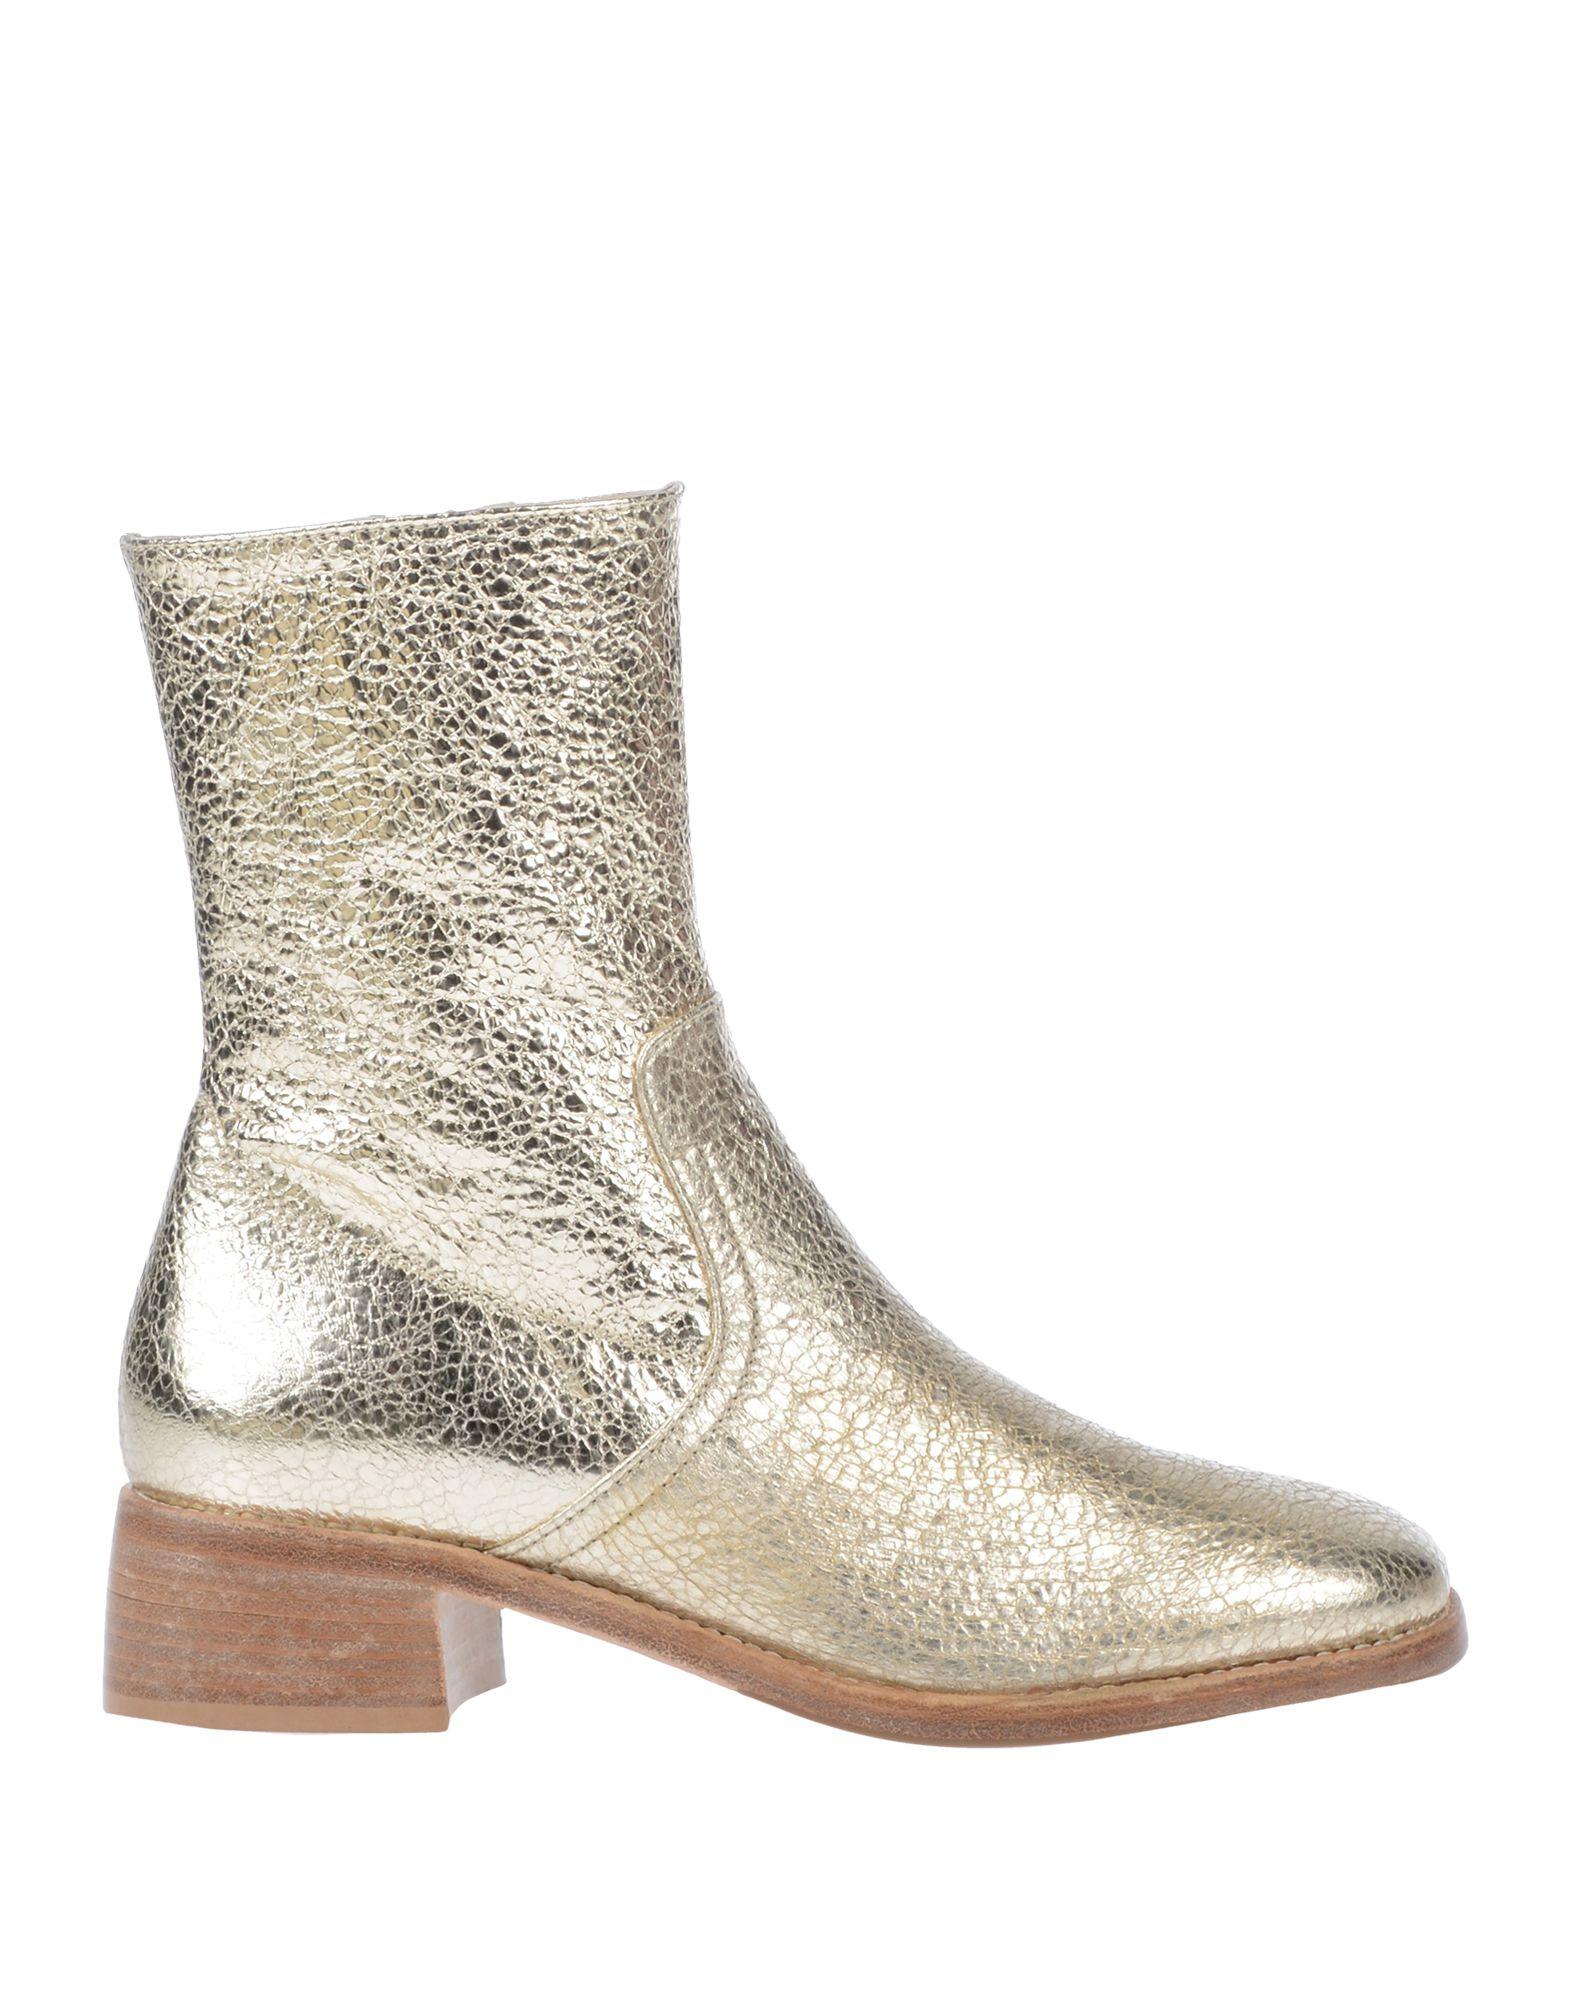 Twinset Ankle Boots in Natural | Lyst